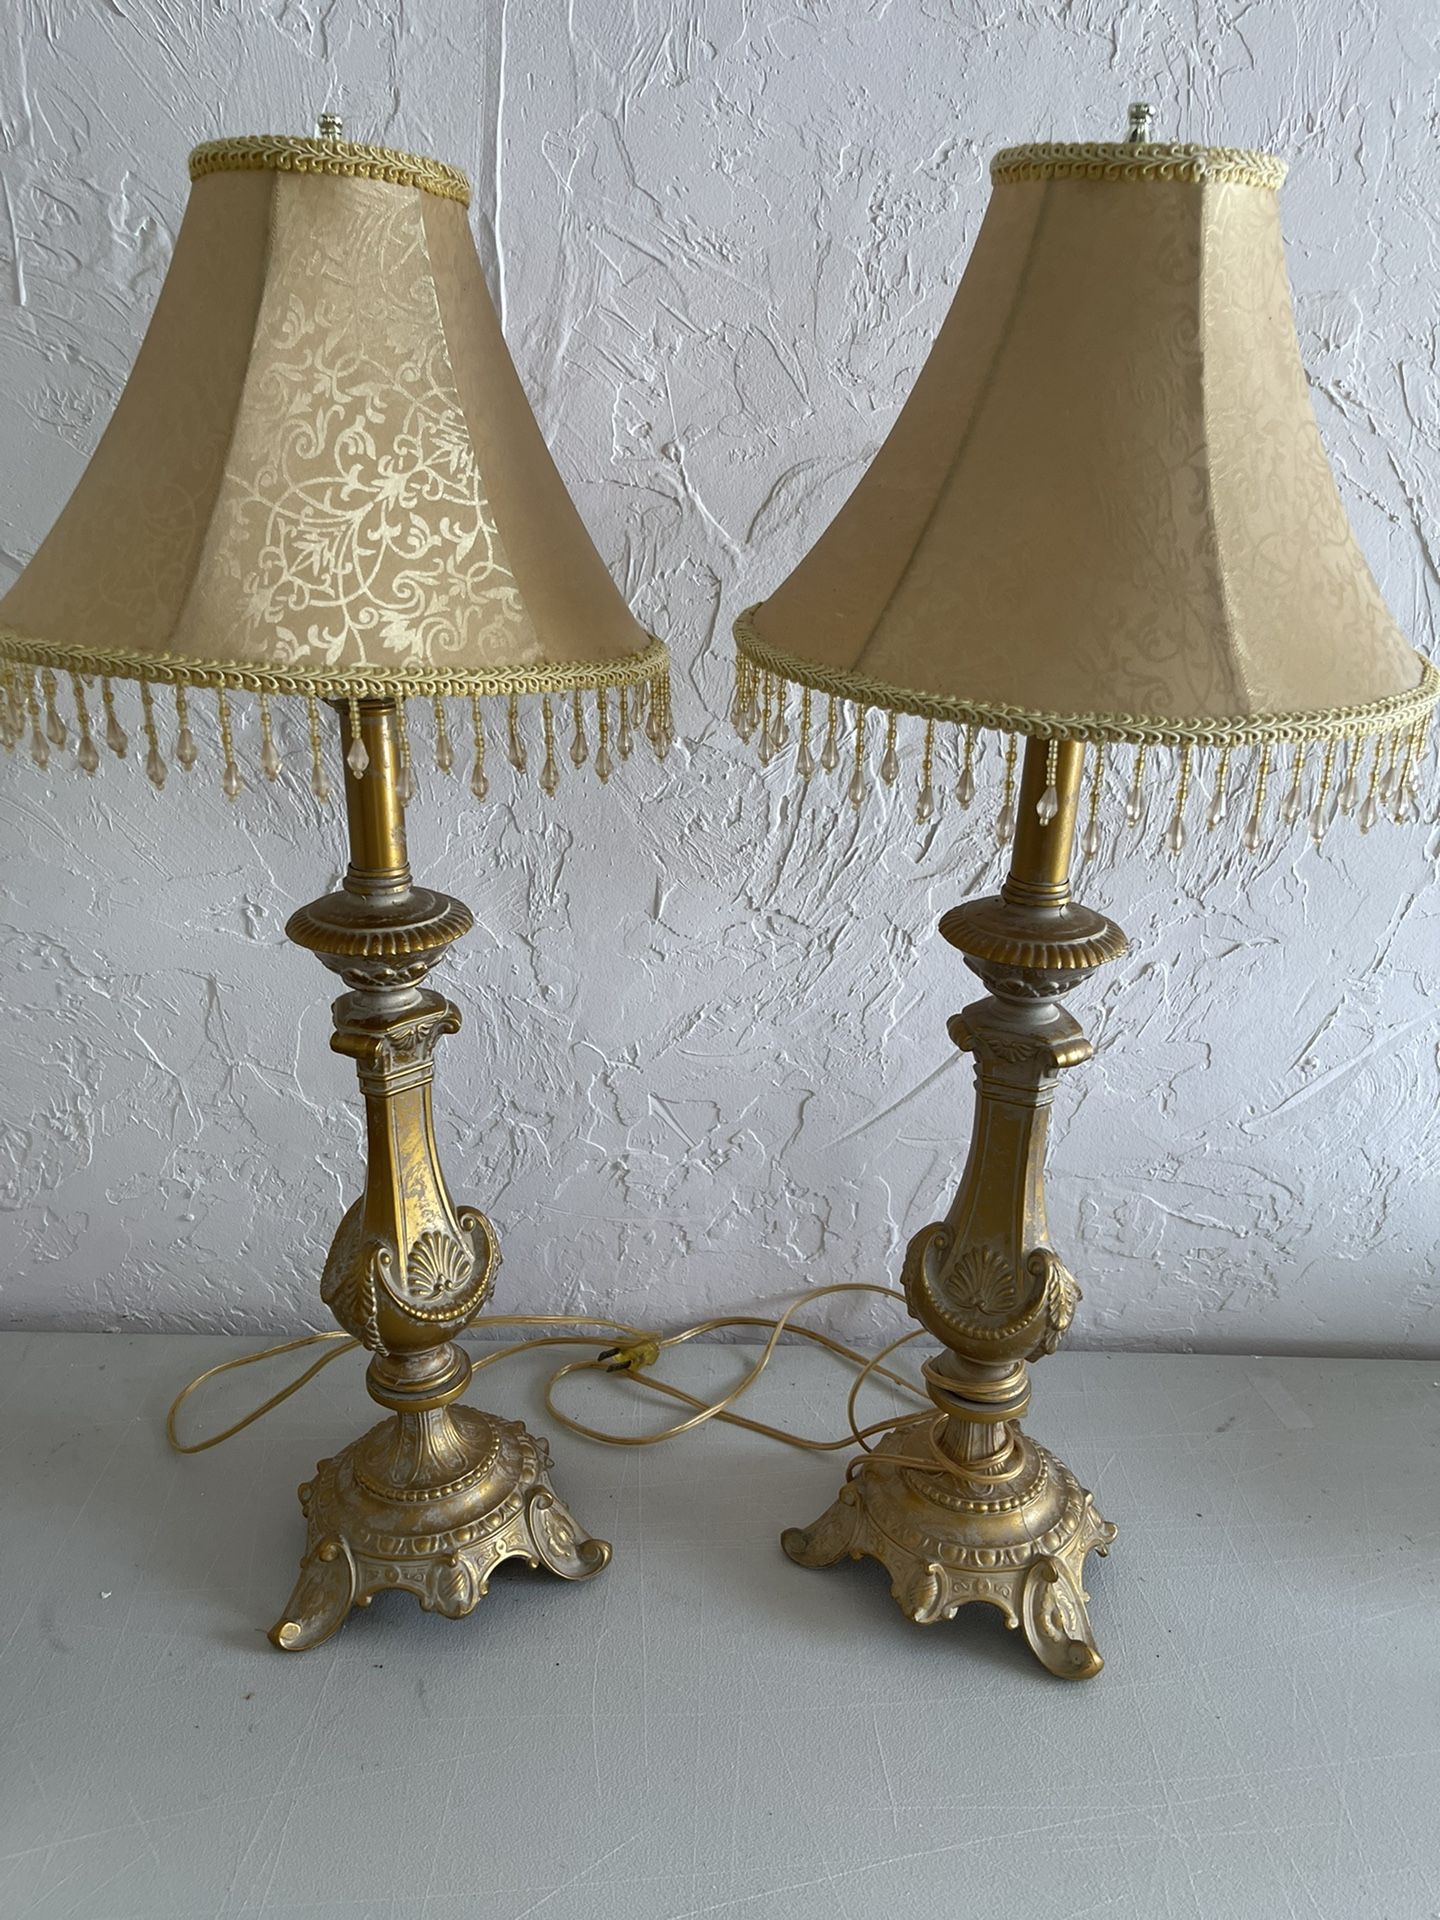 Pair Of Gold Table Lamps Lights With Bead Fringe Shades